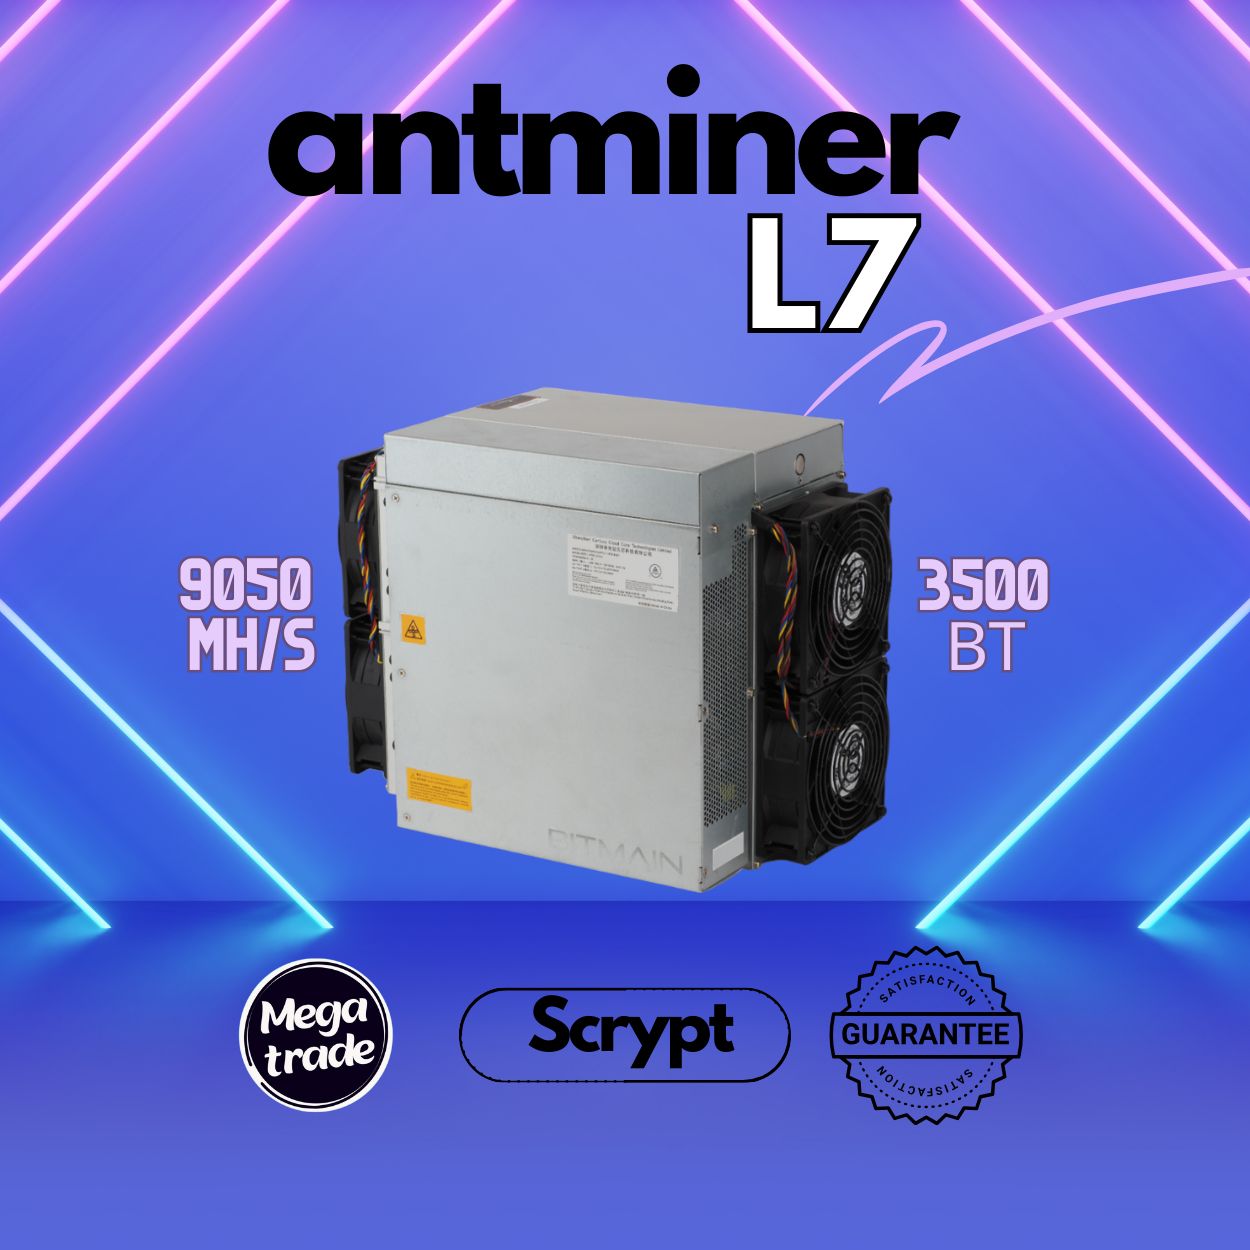 Bitmain Antminer l7 9500 MH/S. Antminer l7 9300. L7 9500mh. Аппарат l7 9500. Antminer l7 9500 mh s